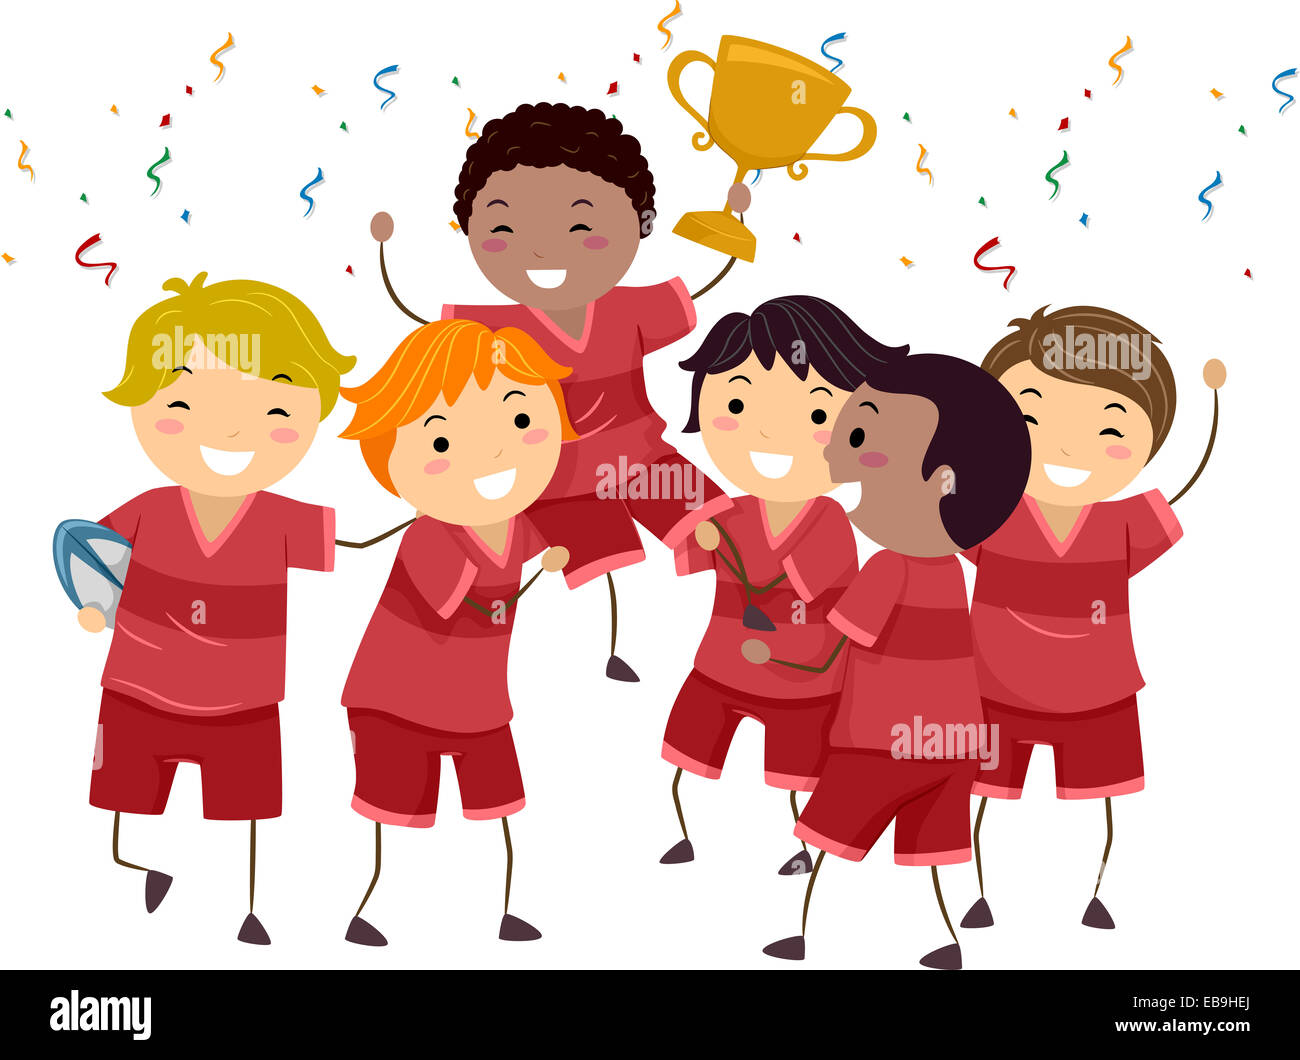 Illustration Featuring a Group of Kids Celebrating Their Championship Win Stock Photo